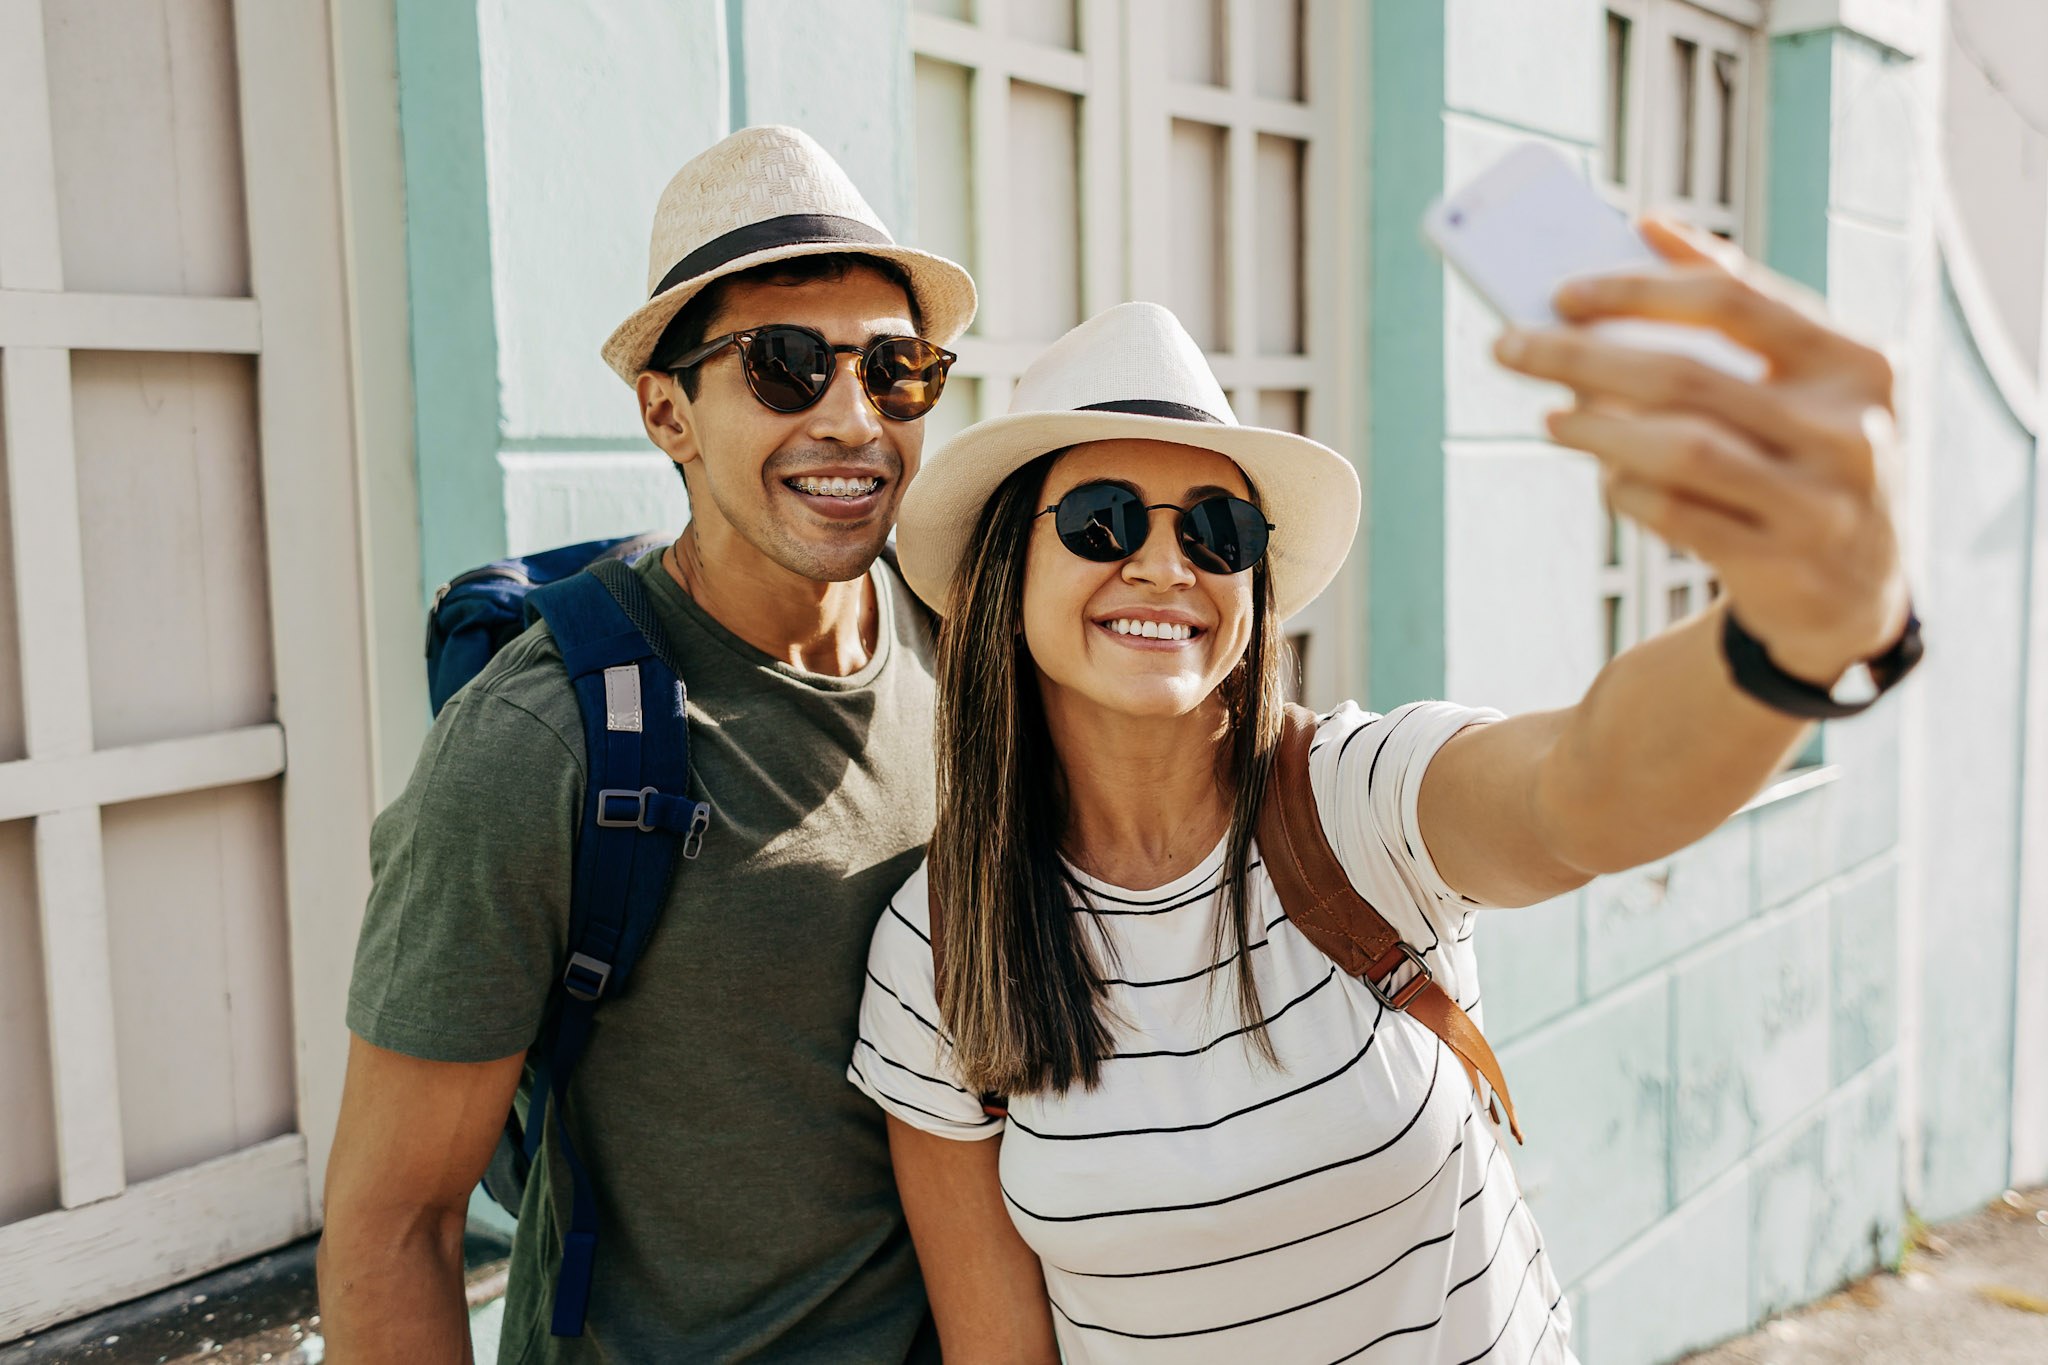 stock photo of a tourist couple in sunglasses and sunhats taking a selfie together using a smartphone while outside in a sunlit street